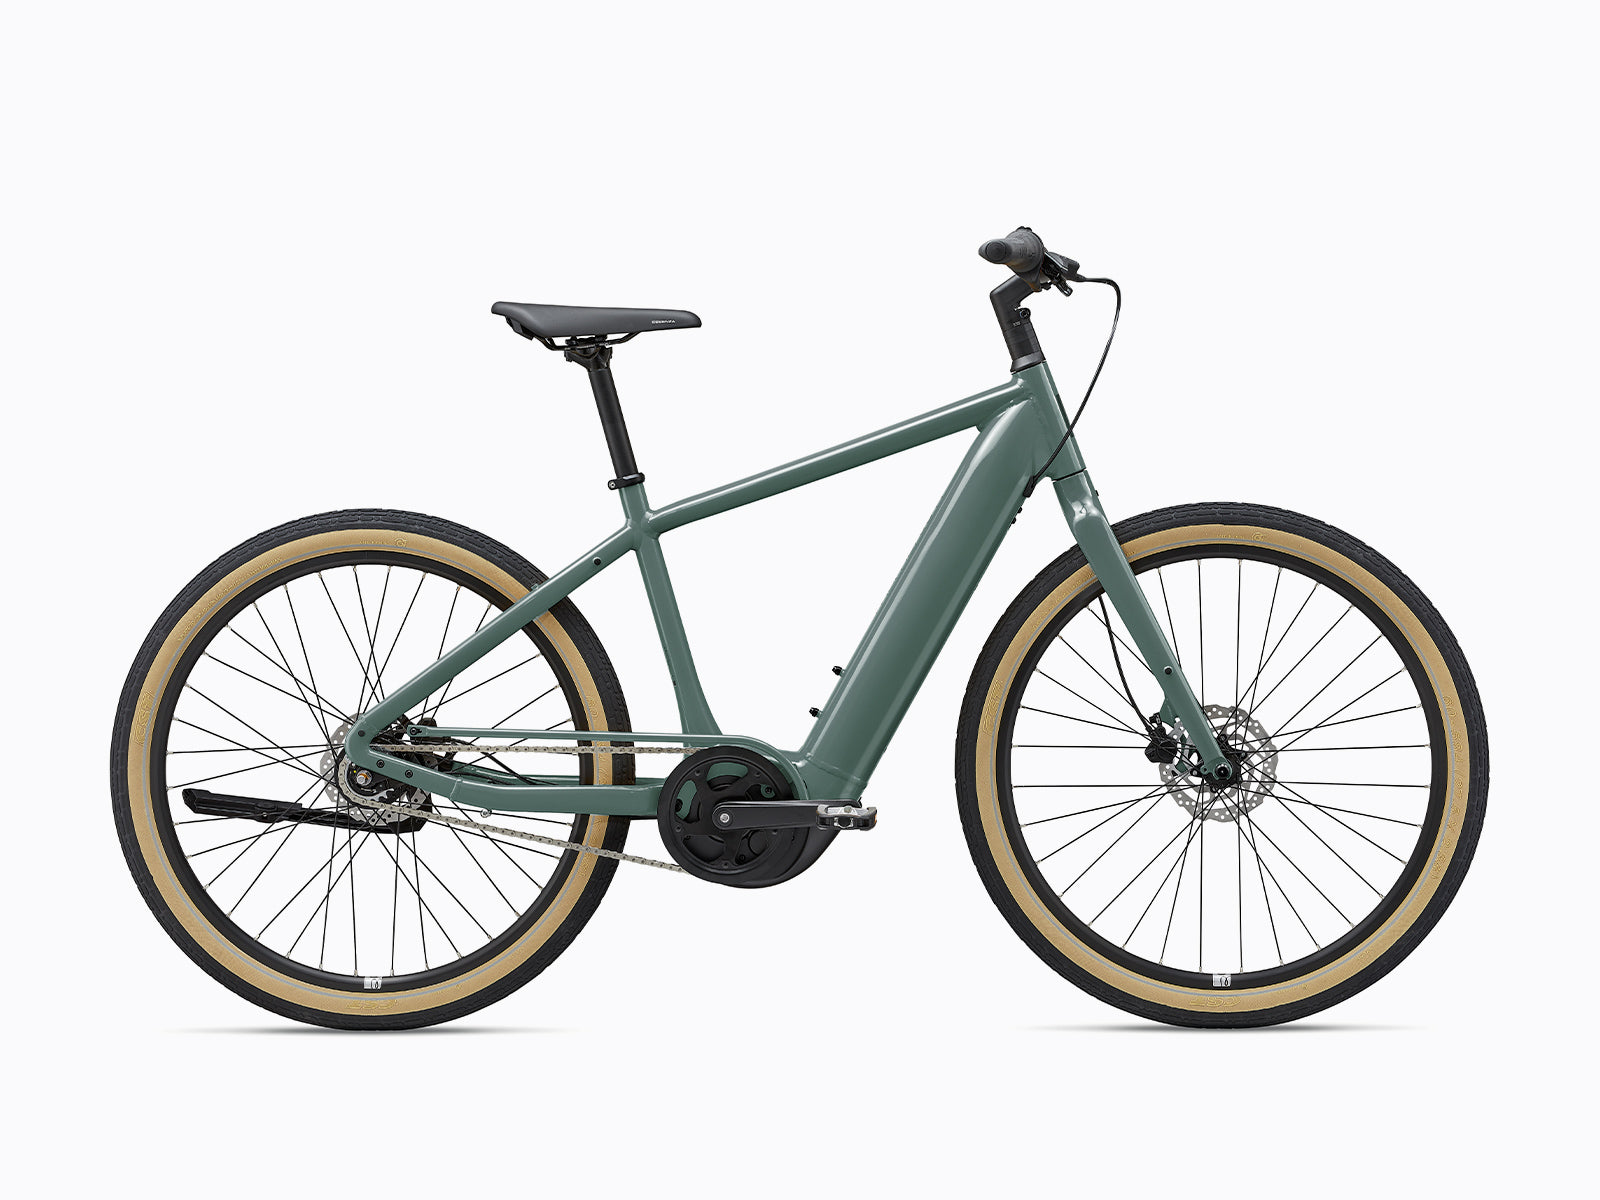 image features the Momentum Transend E+ GTS 25km/h, an electric bike that's purpose built for commuters in green colour